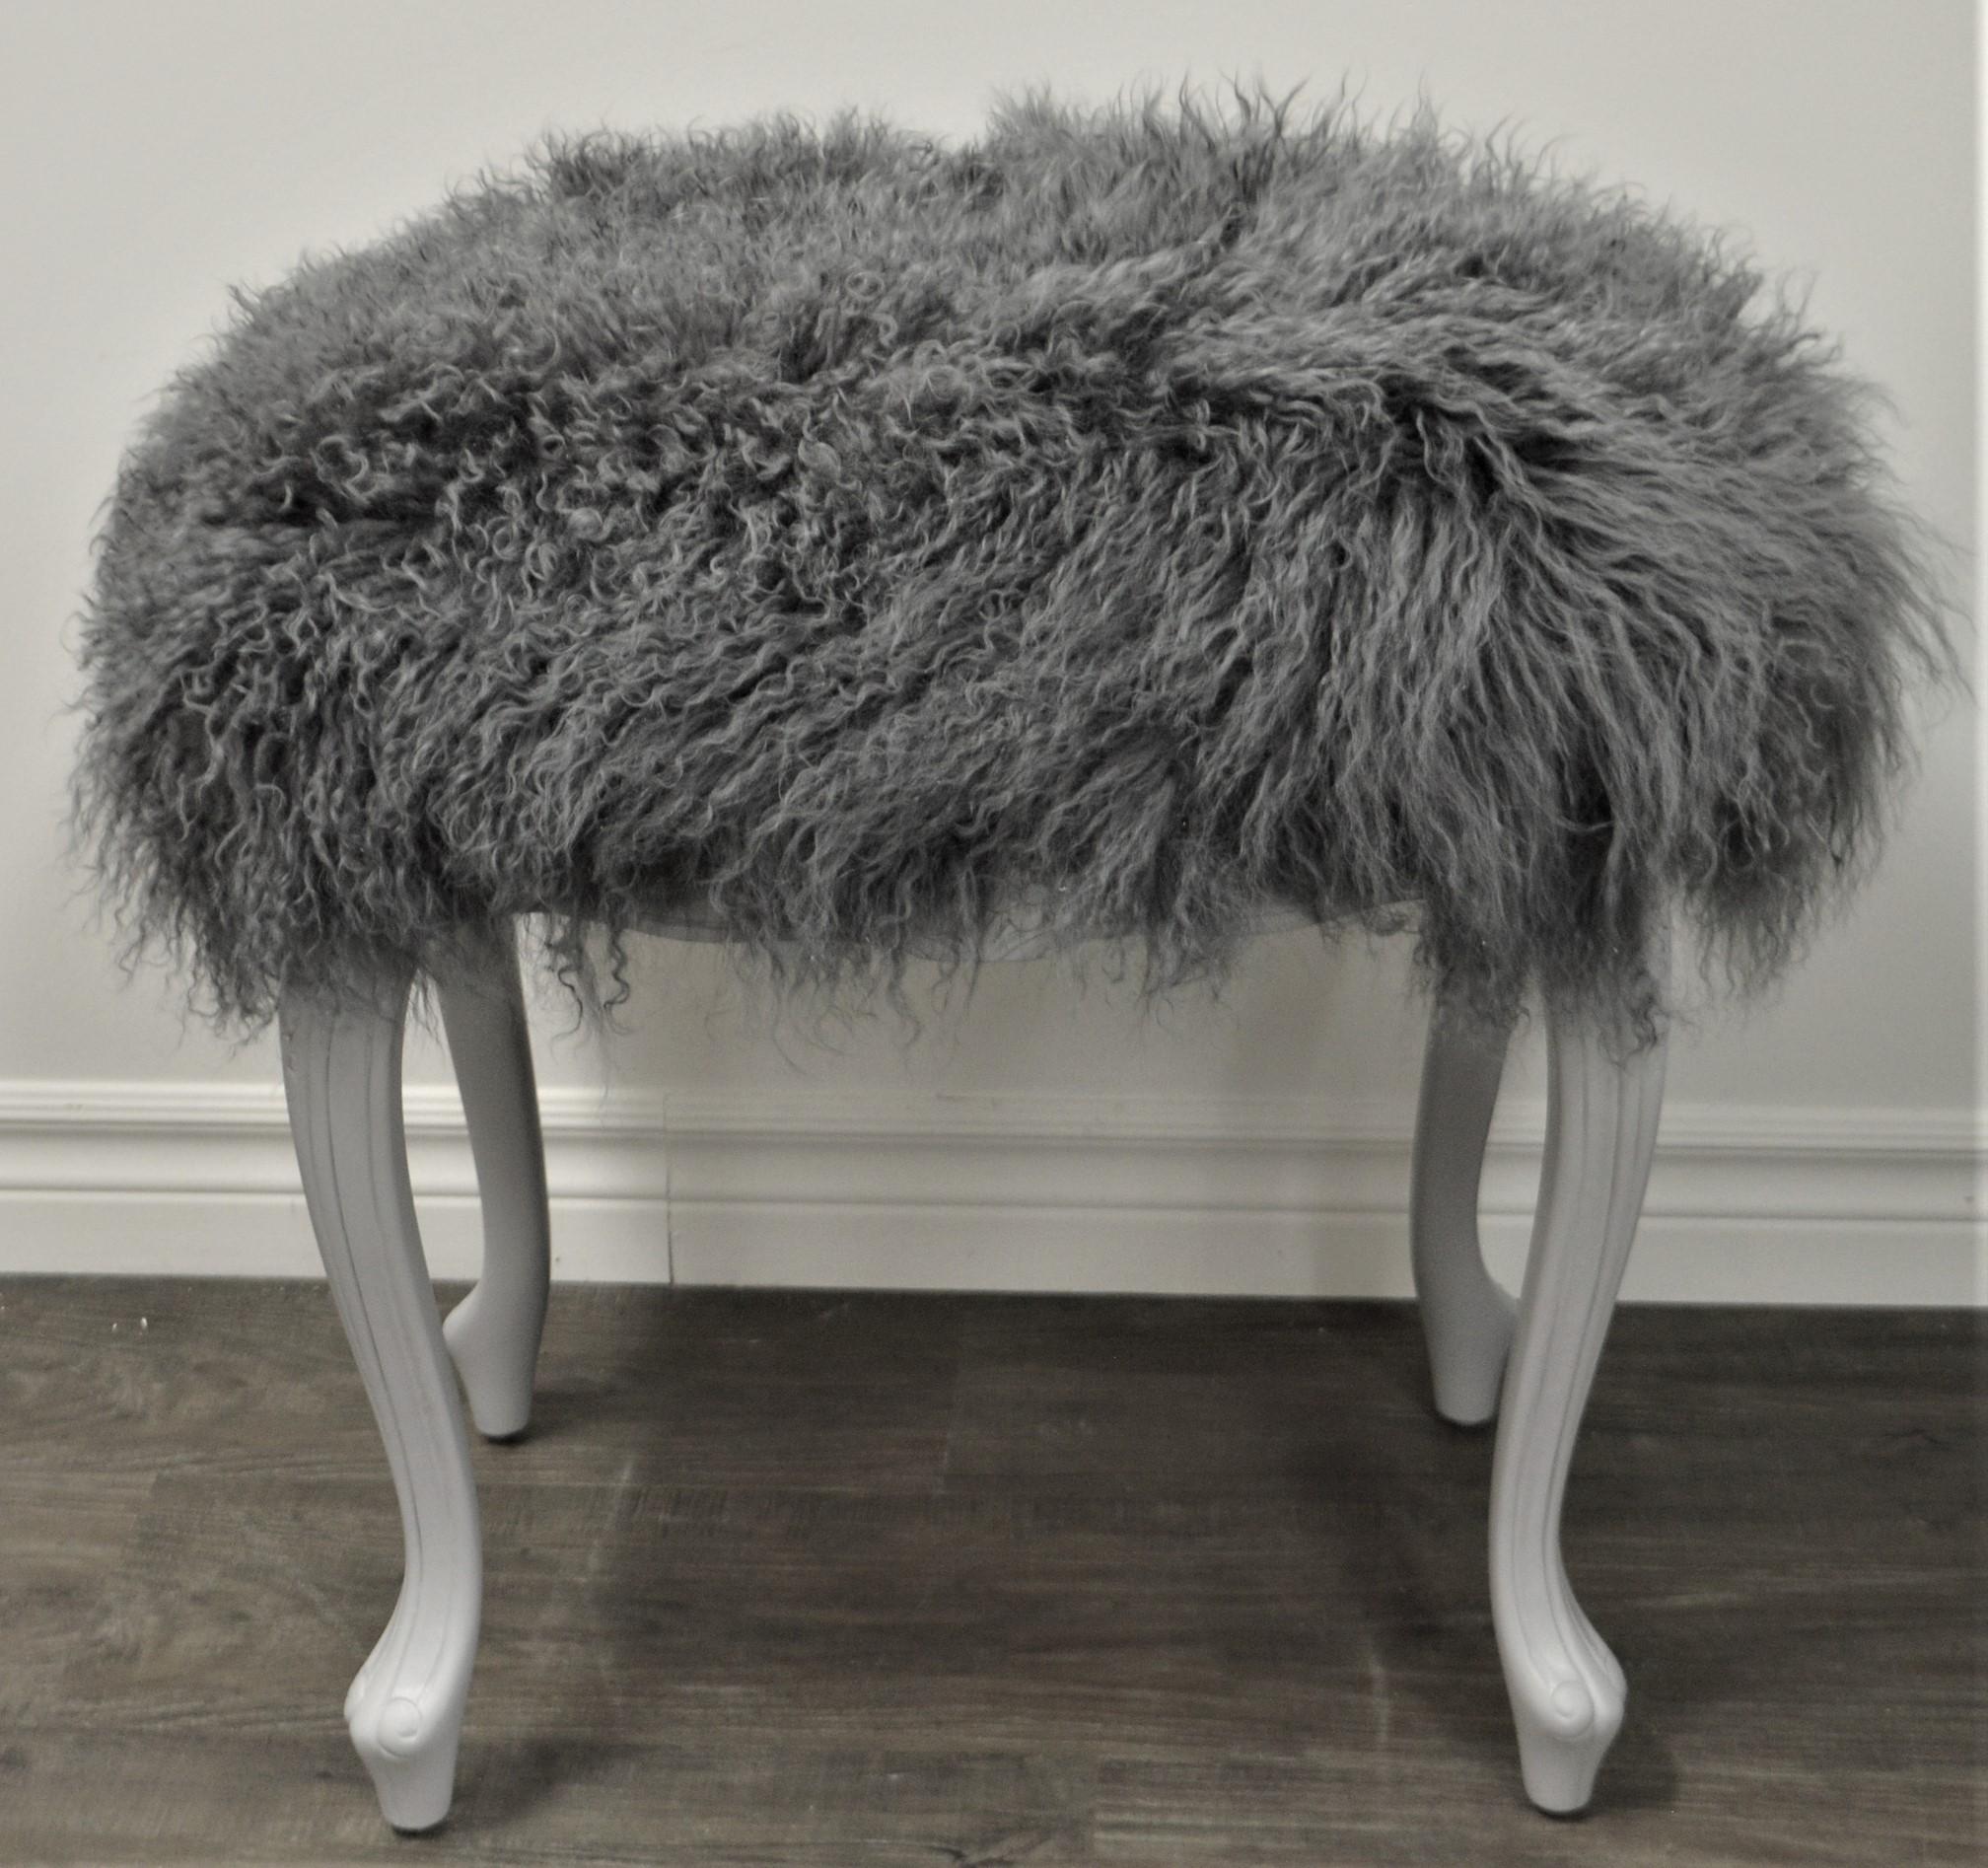 Dyed Wooden Painted Bench Upholstered with a Grey Curly Lamb's Wool For Sale